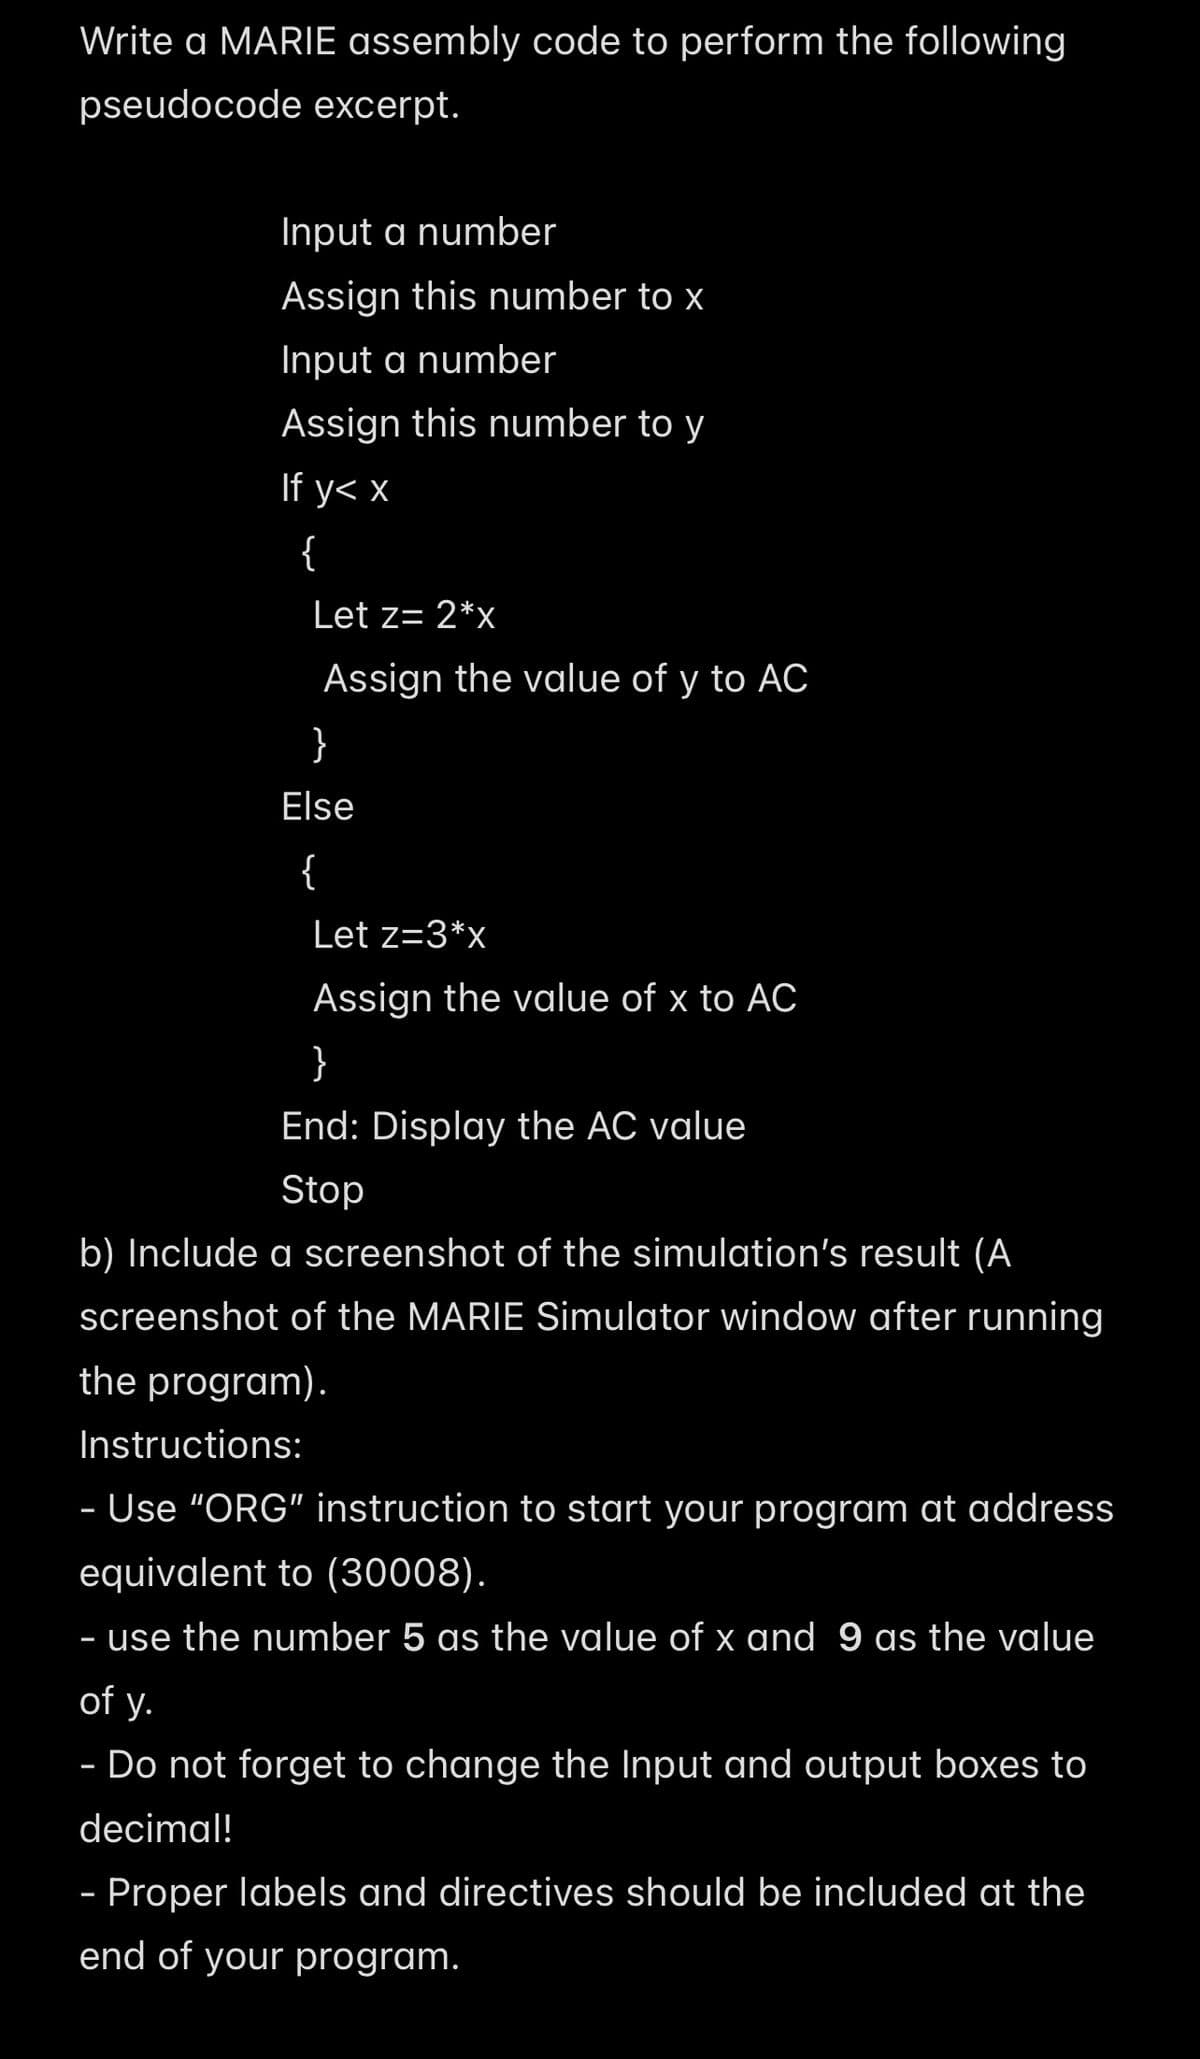 Write a MARIE assembly code to perform the following
pseudocode excerpt.
Input a number
Assign this number to x
Input a number
Assign this number to y
If y< x
{
Let z= 2*x
}
Assign the value of y to AC
Else
{
Let z=3*x
Assign the value of x to AC
}
End: Display the AC value
Stop
b) Include a screenshot of the simulation's result (A
screenshot of the MARIE Simulator window after running
the program).
Instructions:
- Use "ORG" instruction to start your program at address
equivalent to (30008).
- use the number 5 as the value of x and 9 as the value
of y.
- Do not forget to change the Input and output boxes to
decimal!
- Proper labels and directives should be included at the
end of your program.